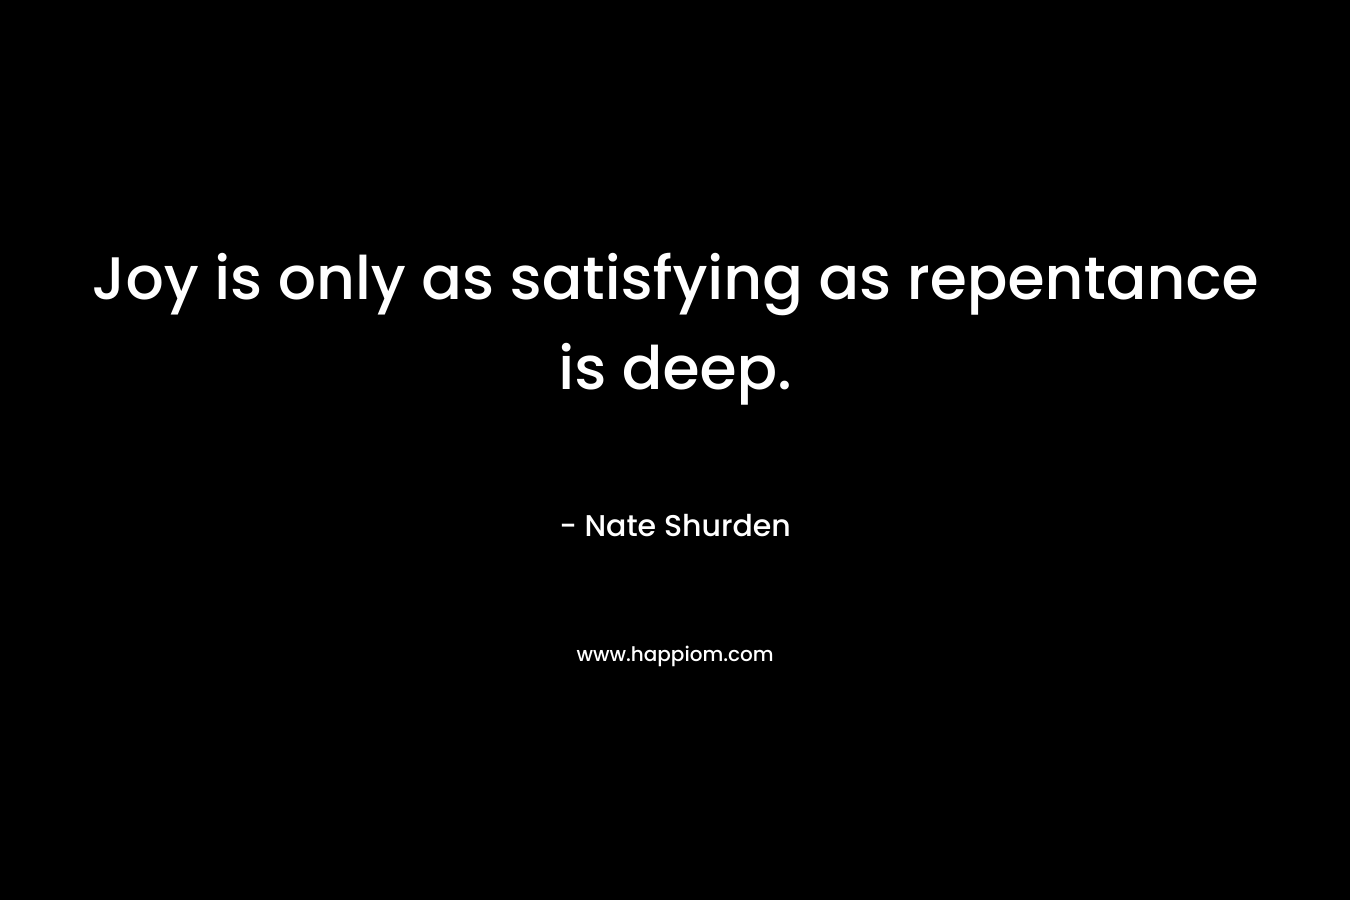 Joy is only as satisfying as repentance is deep.